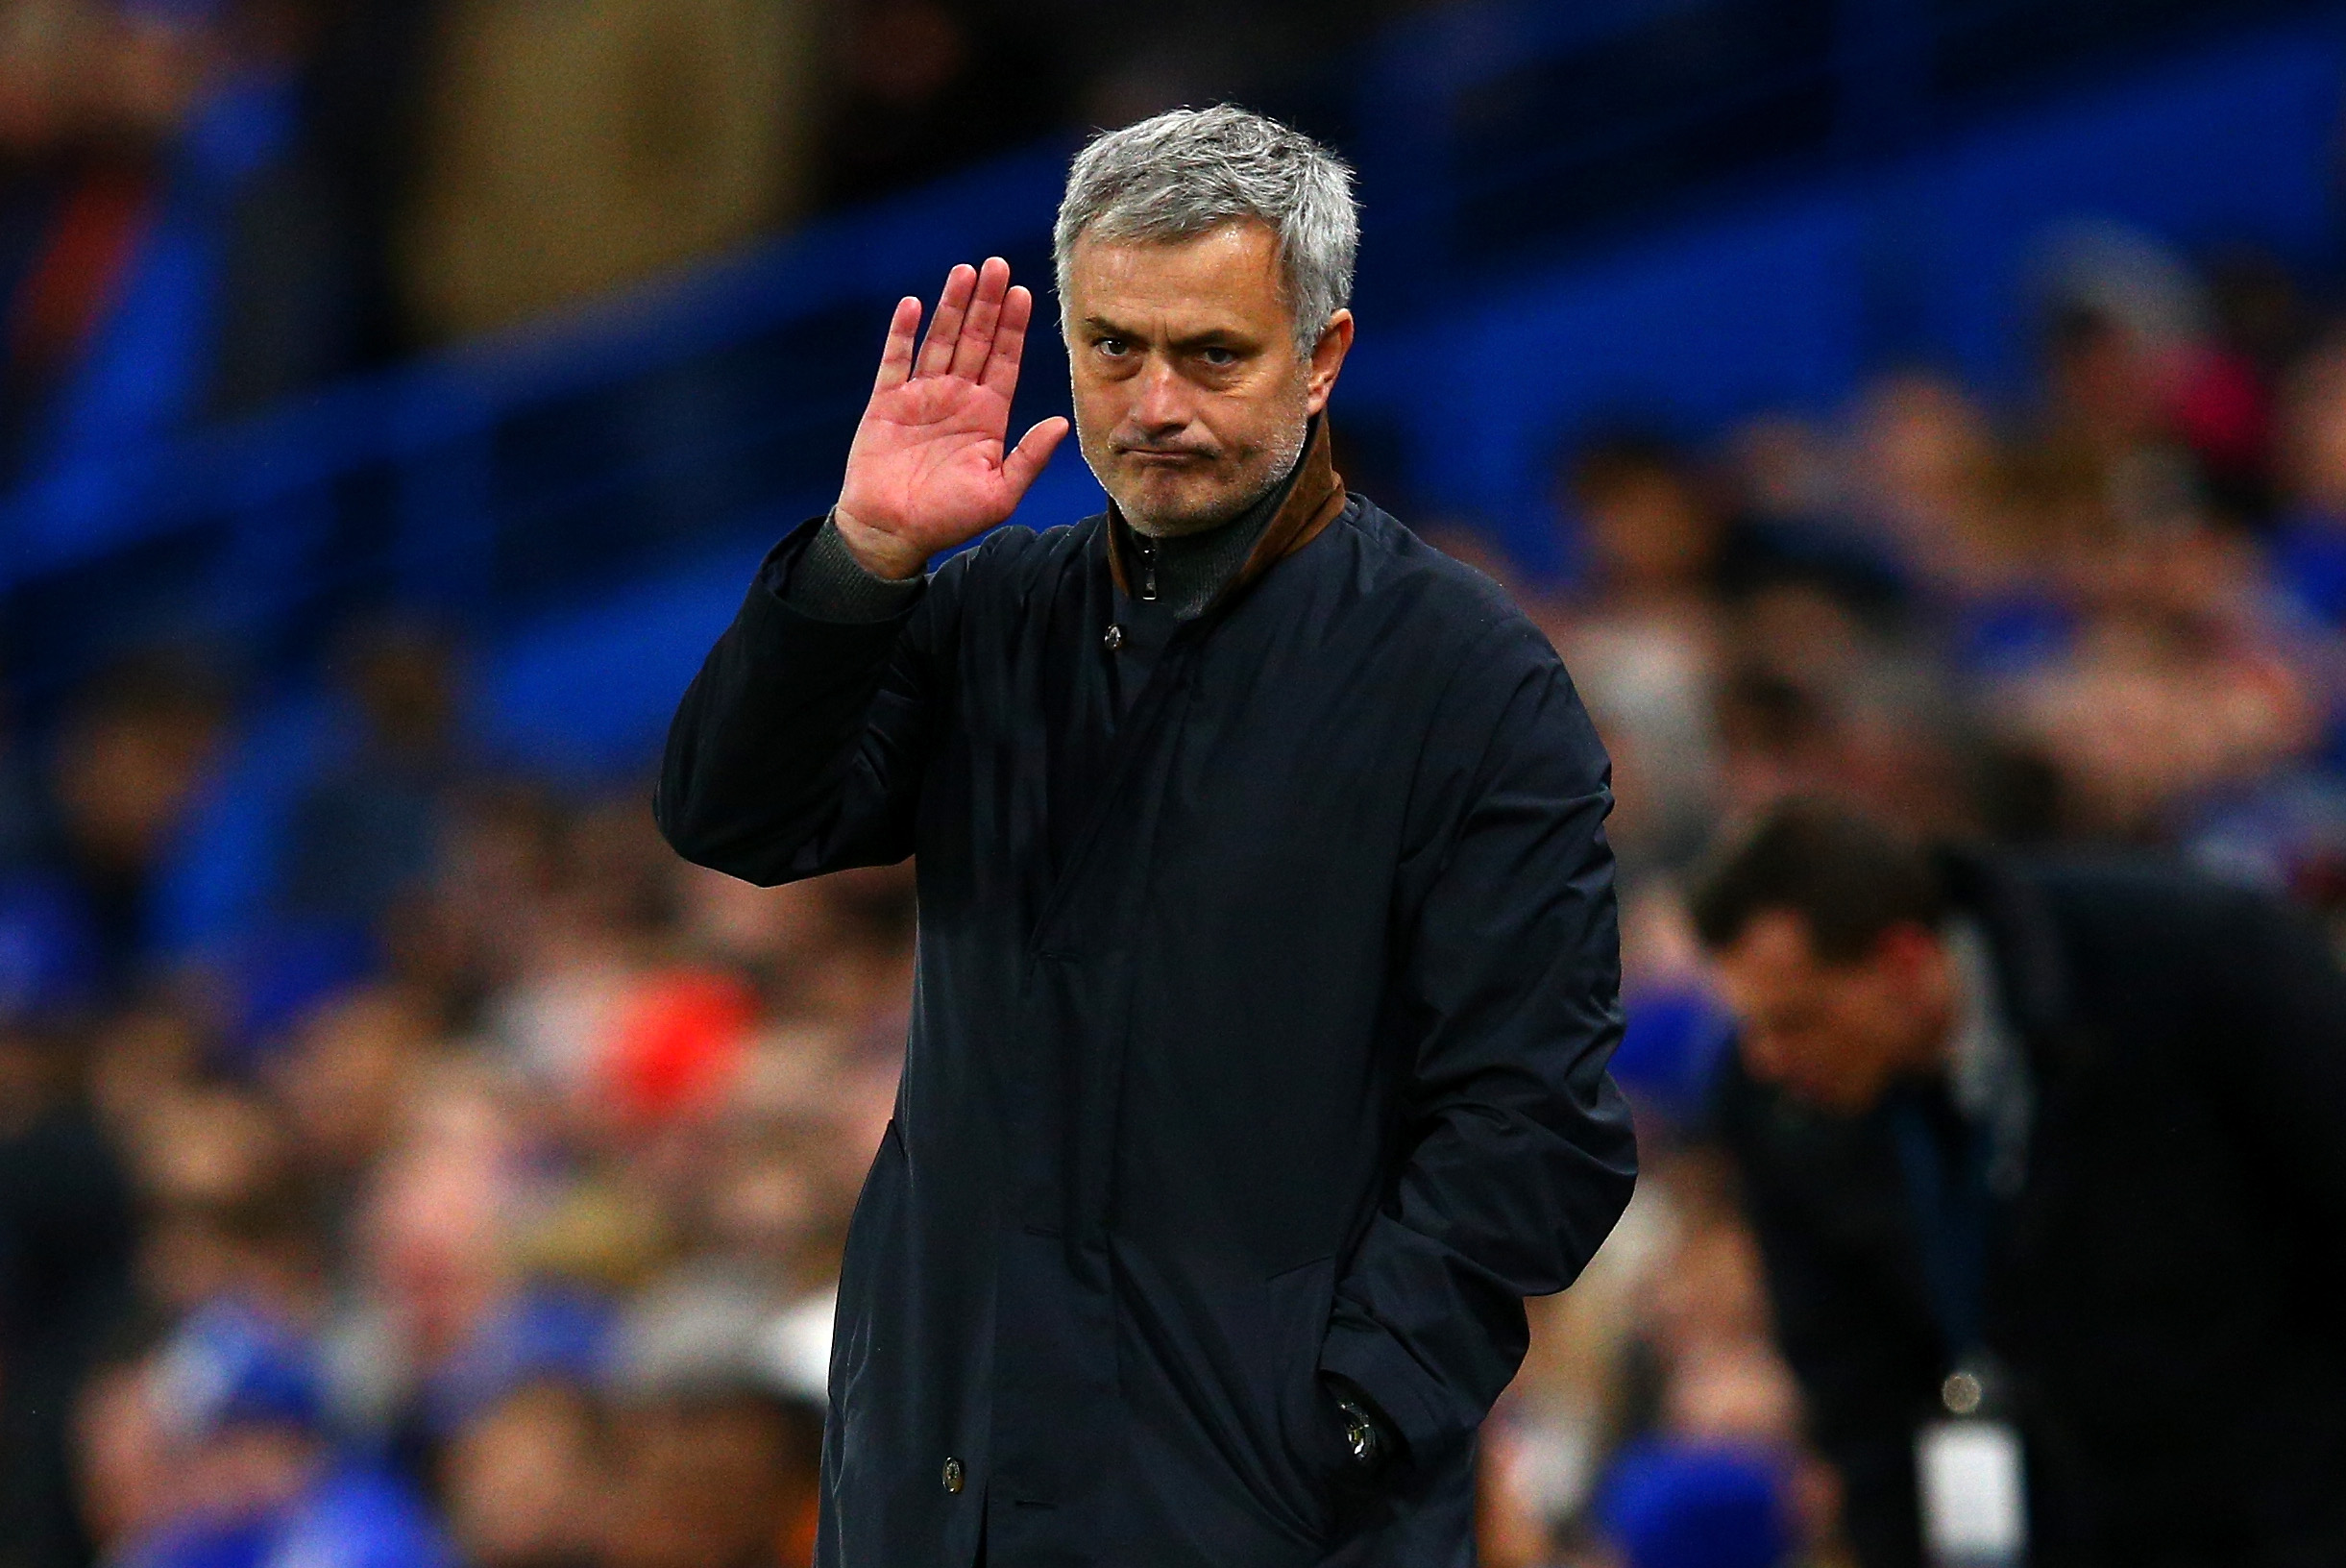 Jose Mourinho. (Photo by Clive Mason/Getty Images)